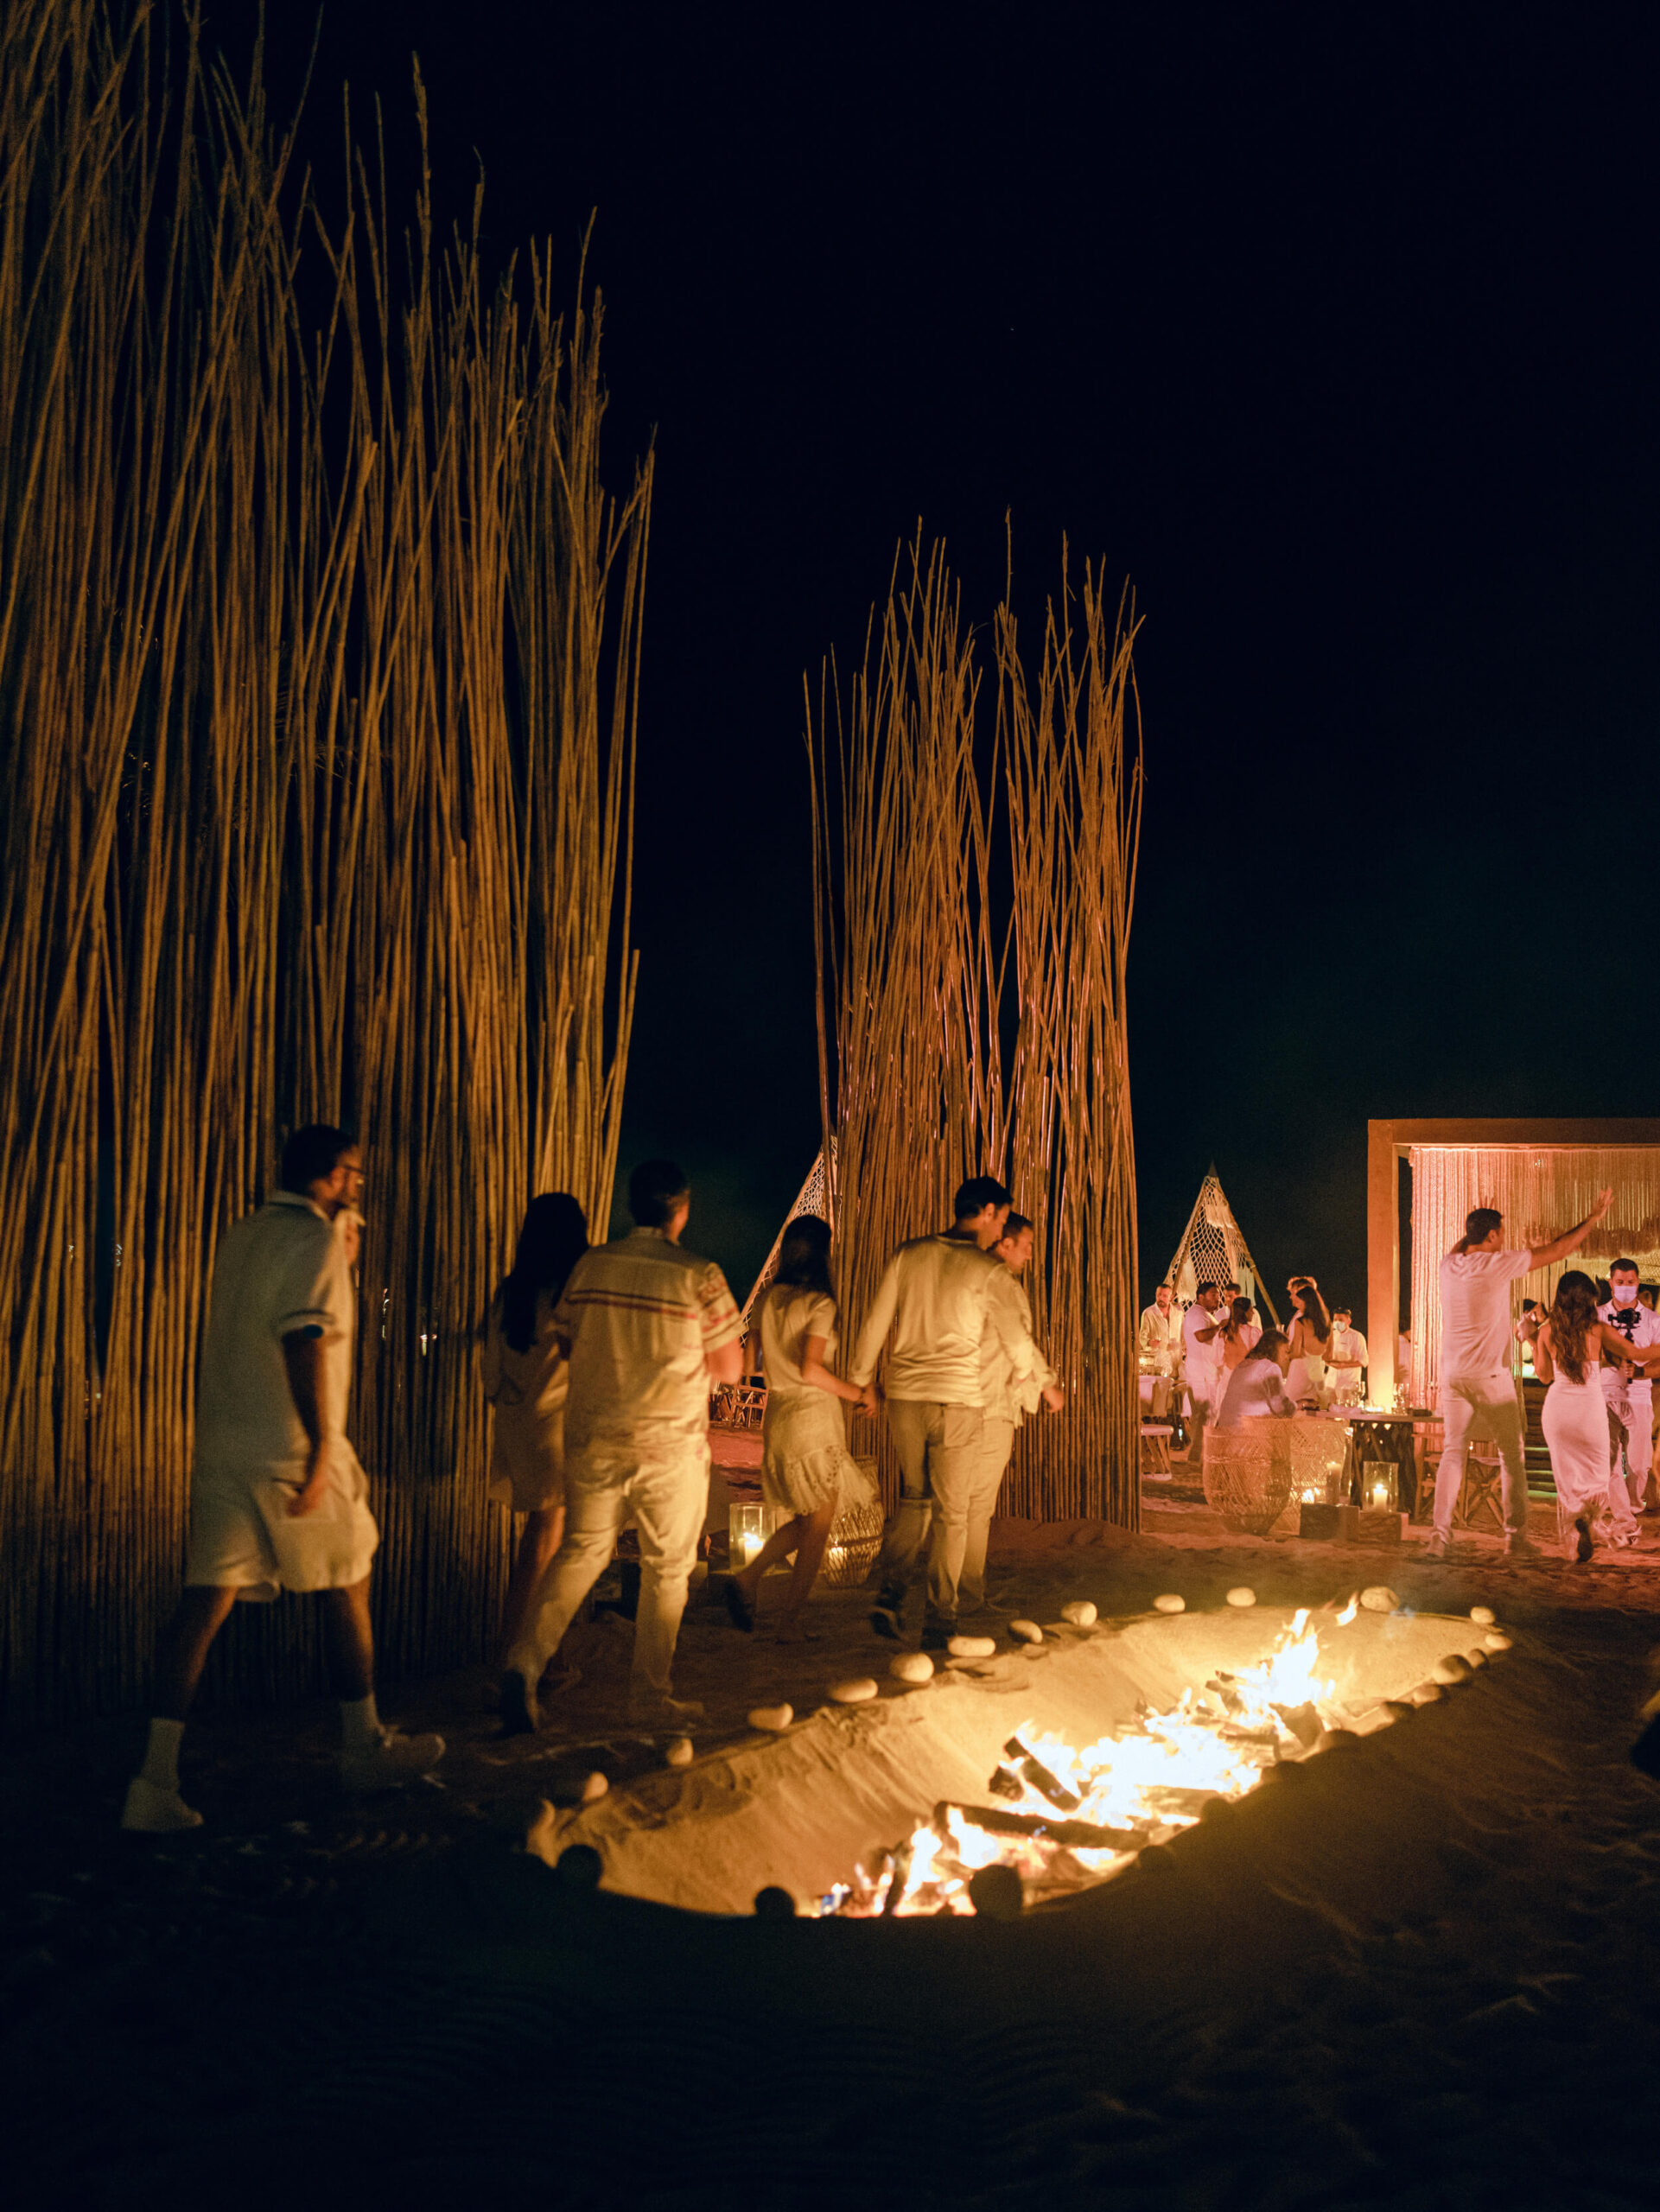 Fire pit at final burning man-style party